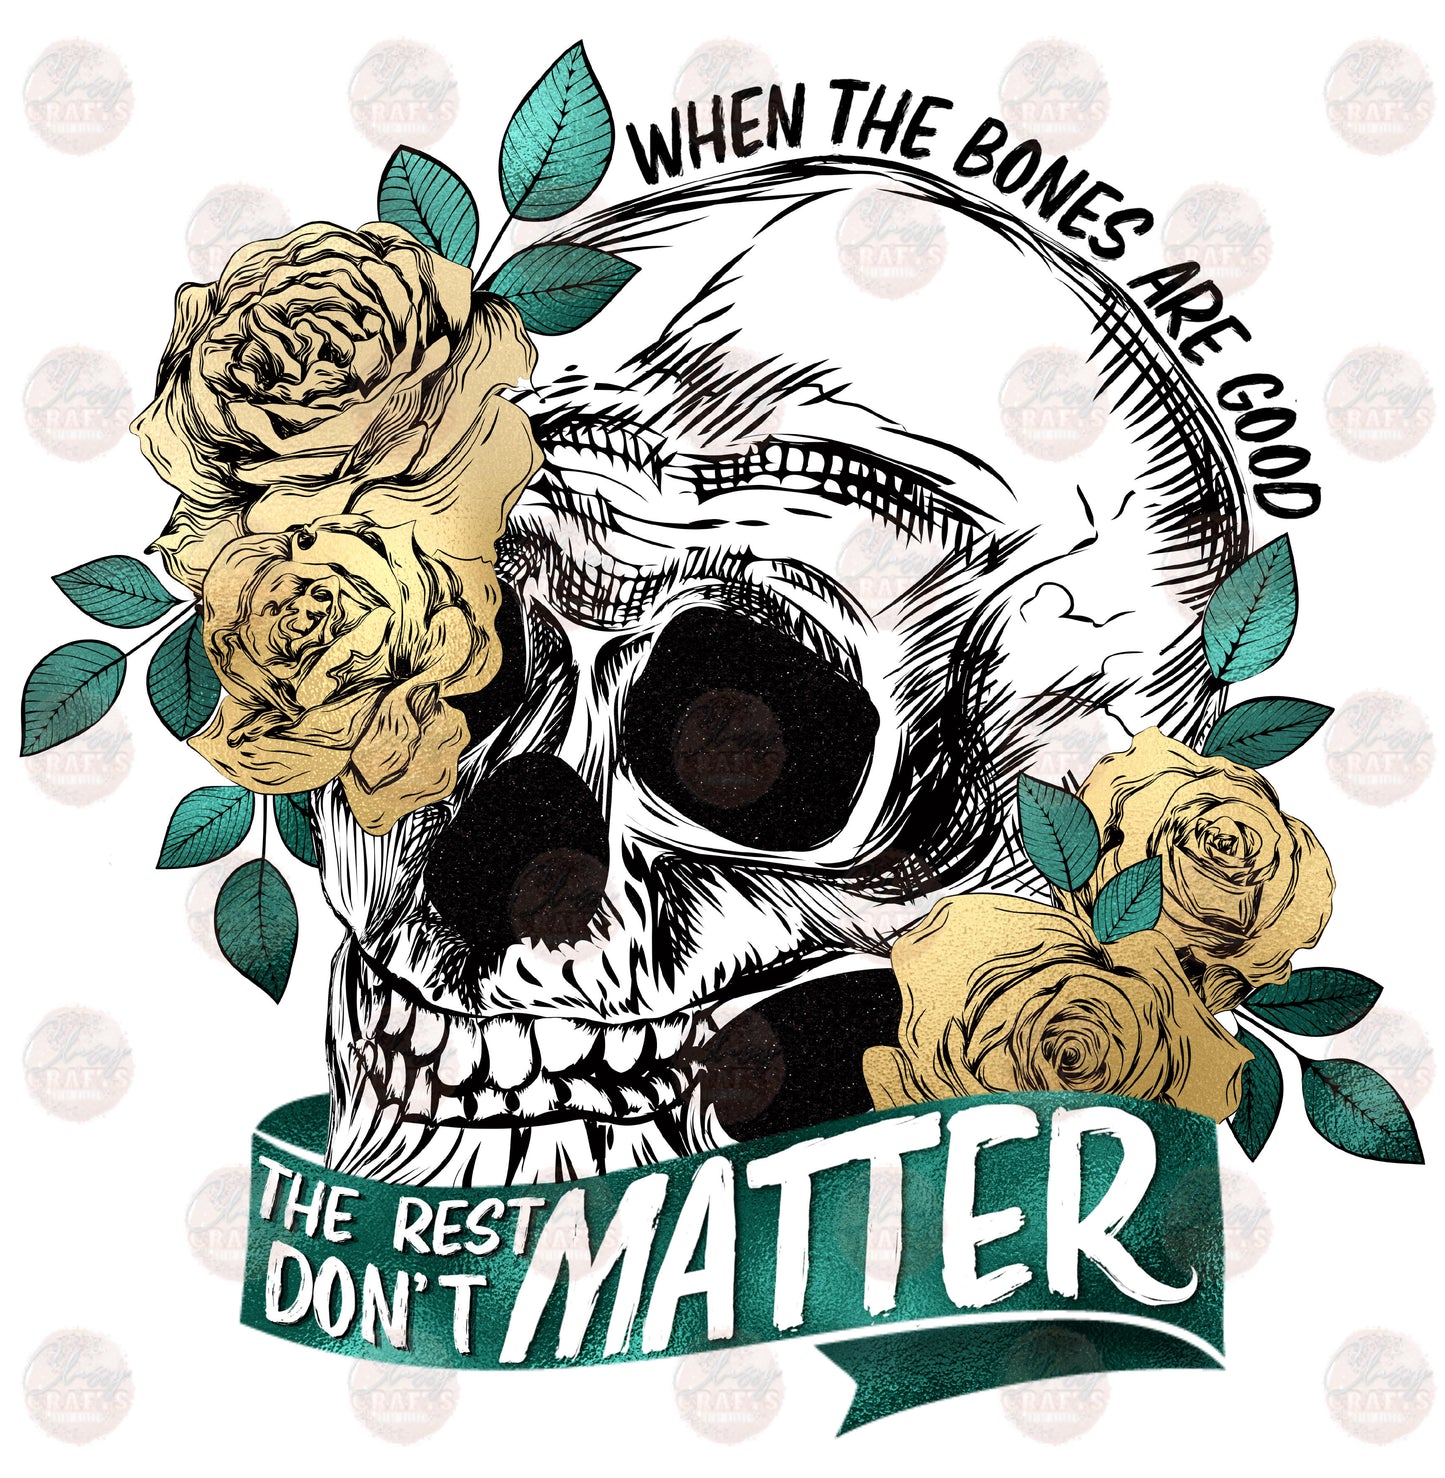 When The Bones Are Good /Turq Ribbon Gold Roses - Sublimation Transfer